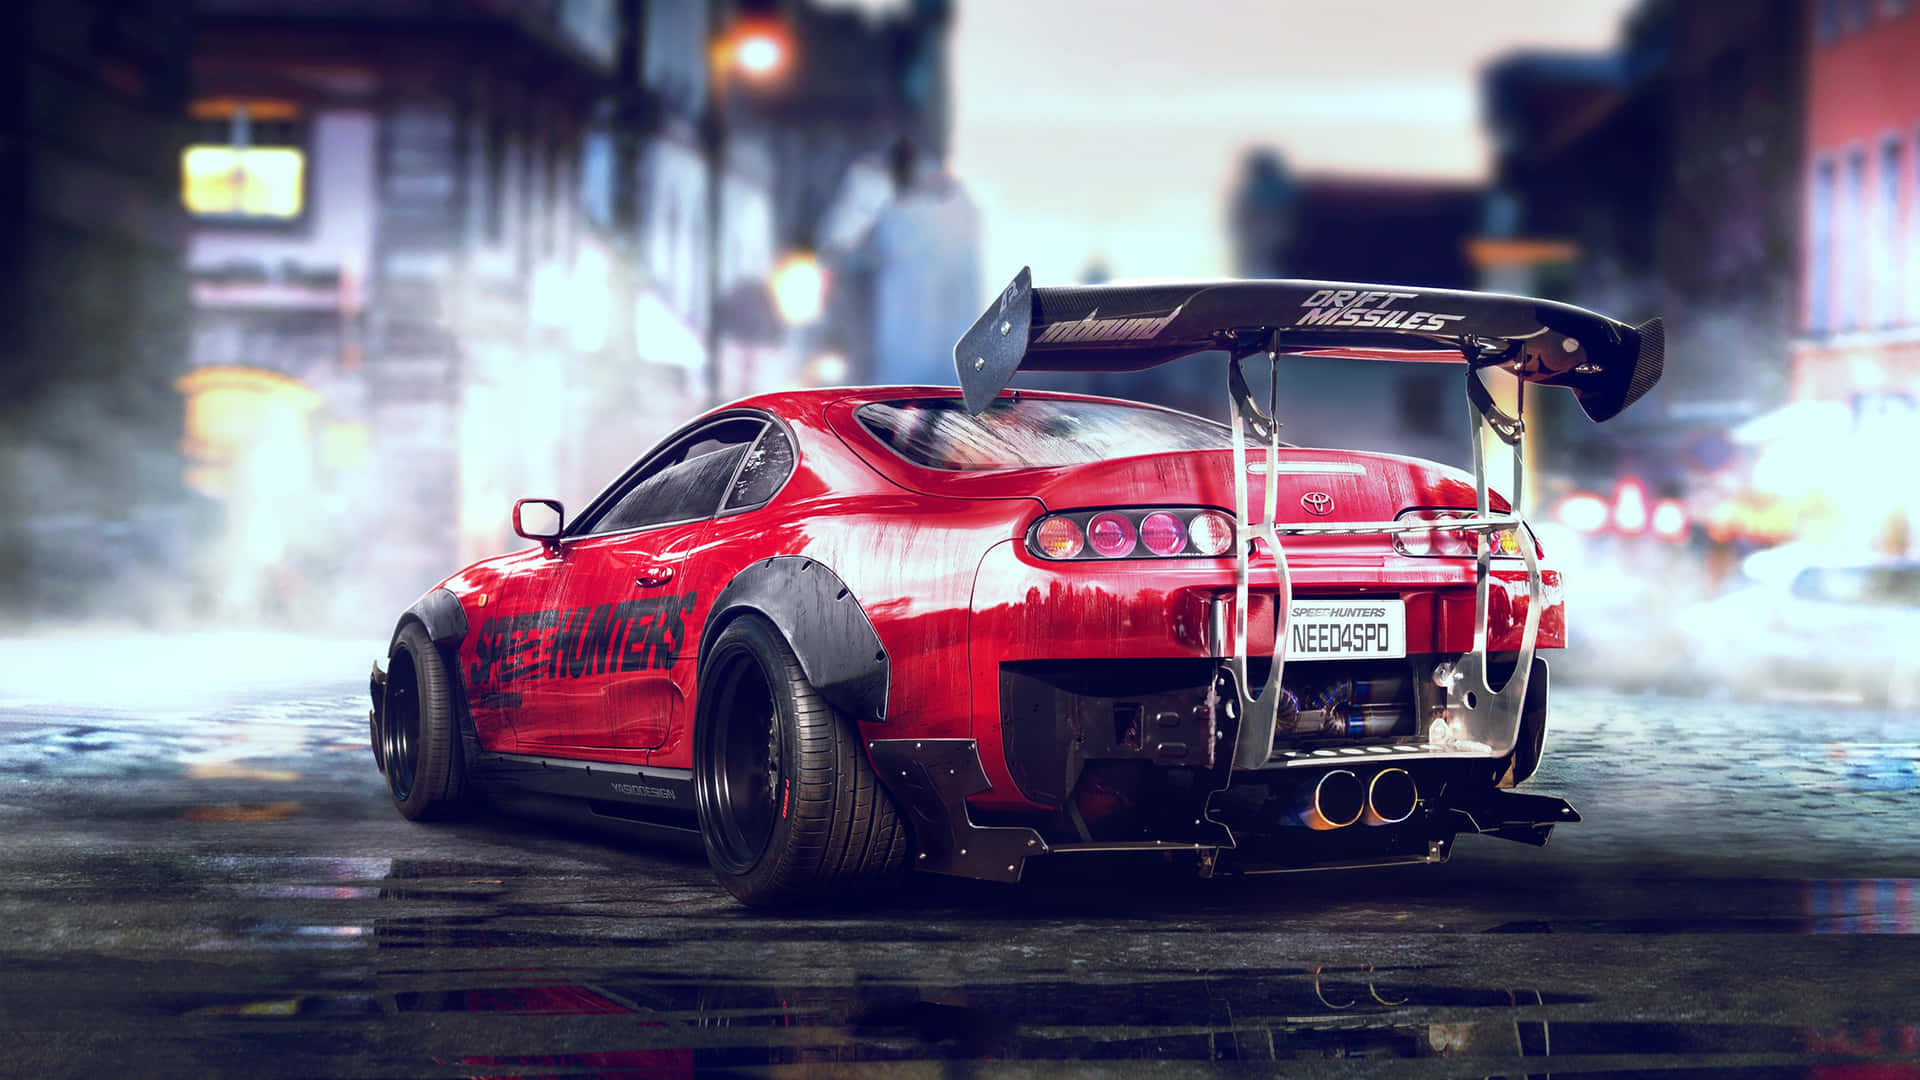 Toyotasupra I Need For Speed Pc. Wallpaper